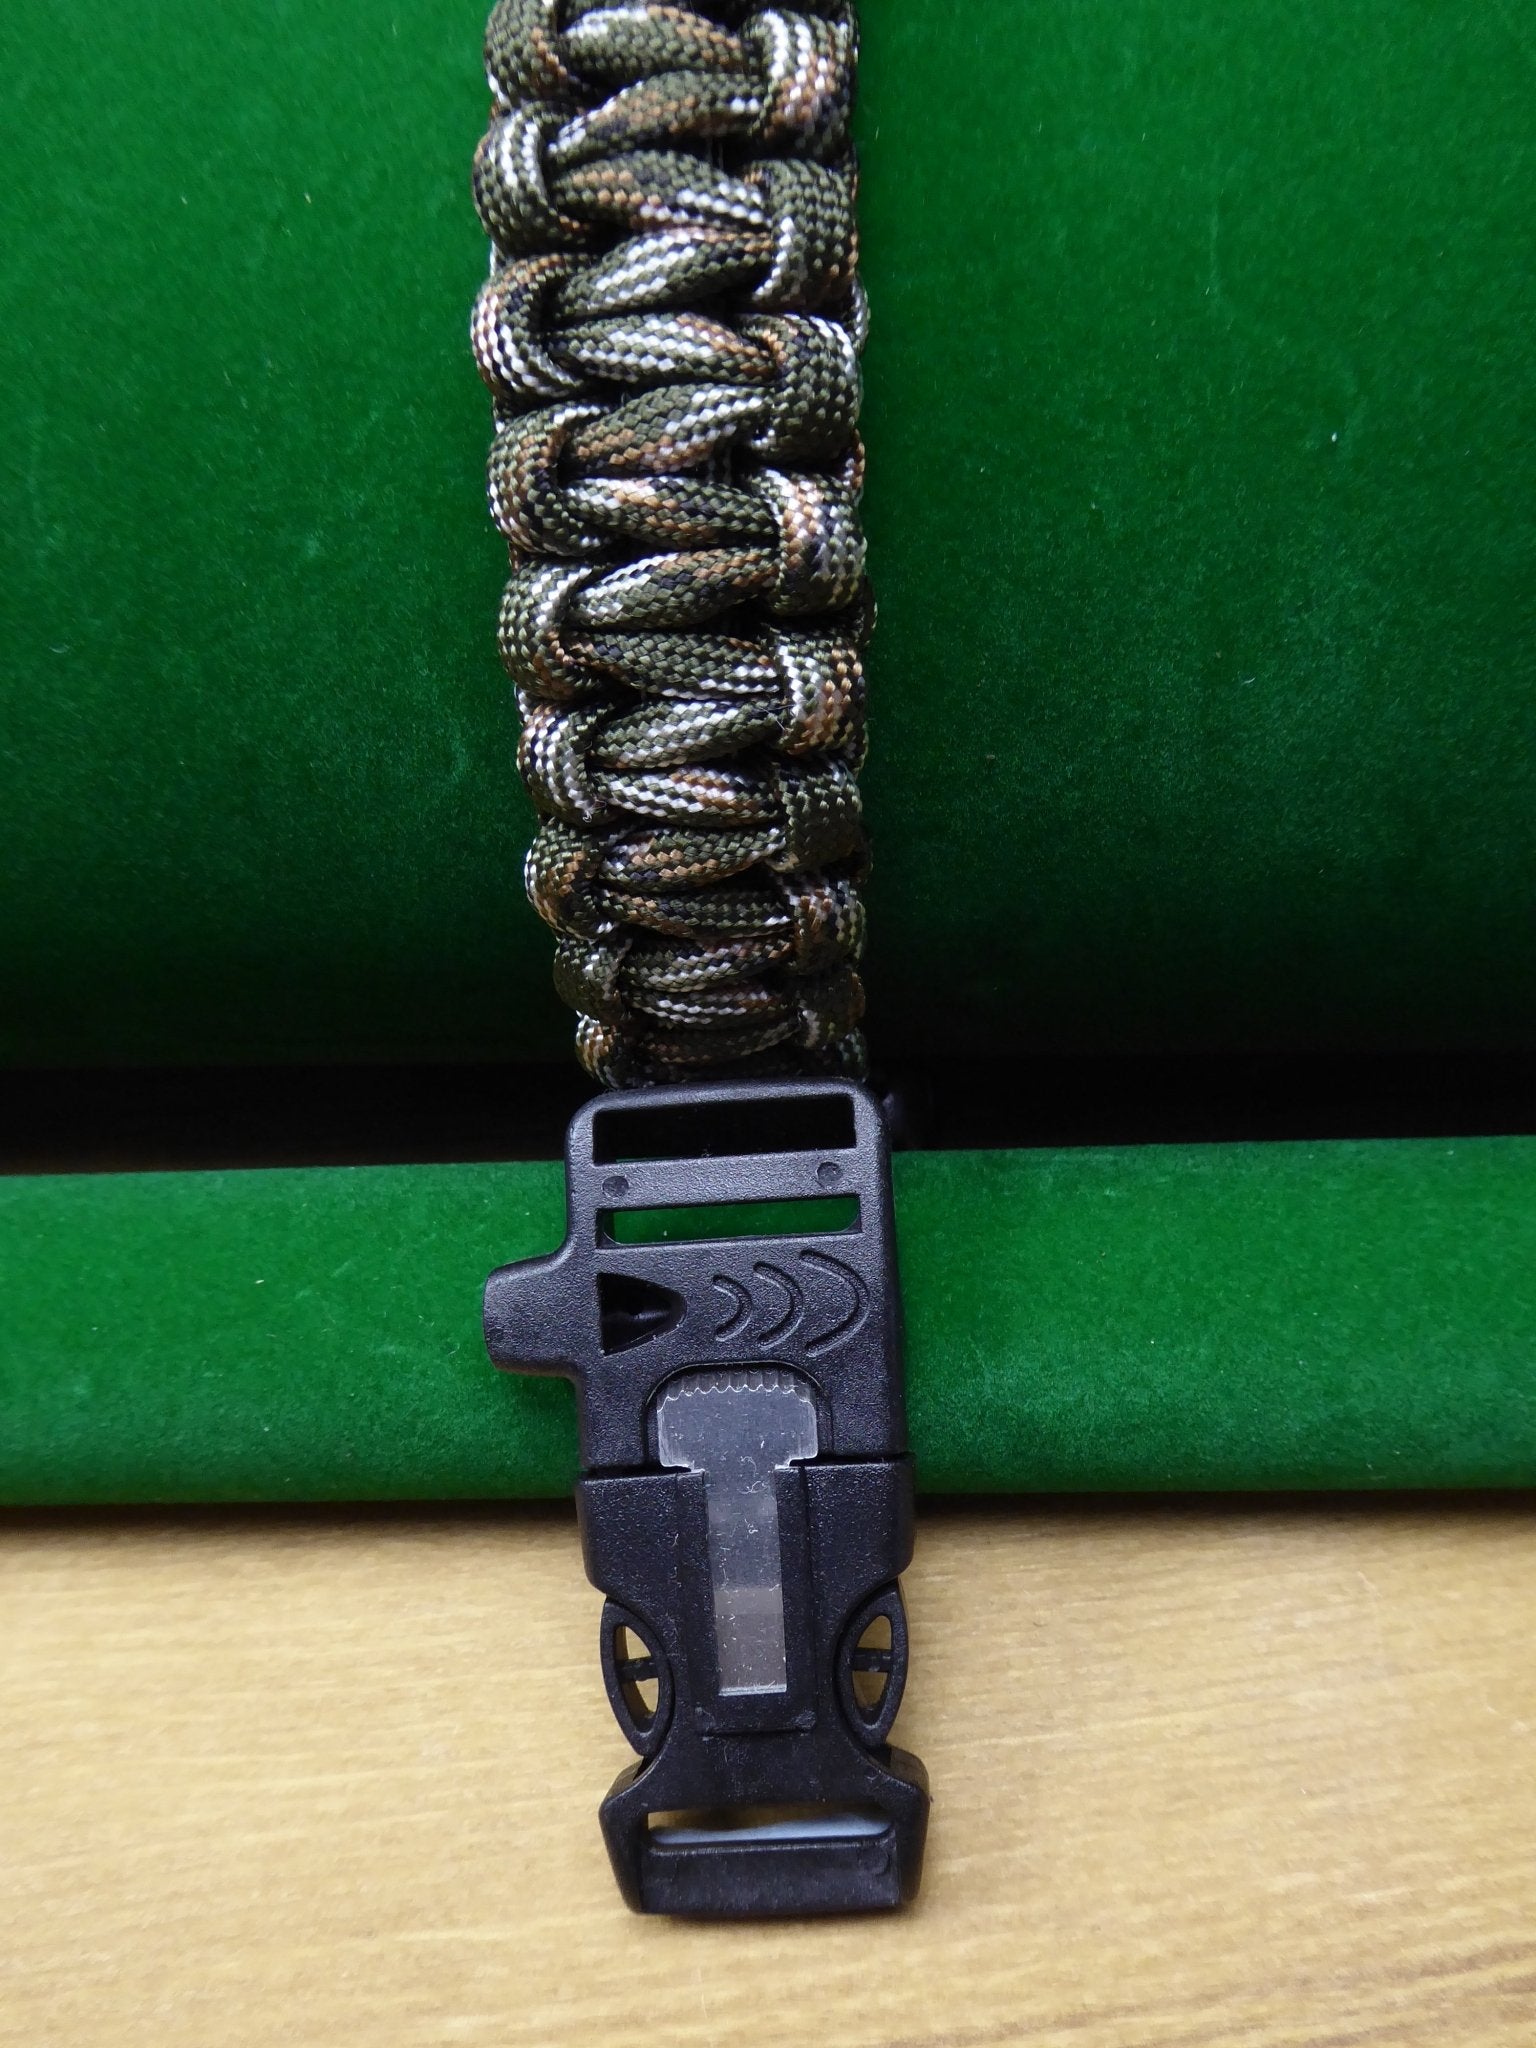 Paracord Buckle Bracelet kits with choice of colours Paracord Huggins Attic Green Camo Black Plastic firesteel scraper & whistle Buckle  [Huggins attic]